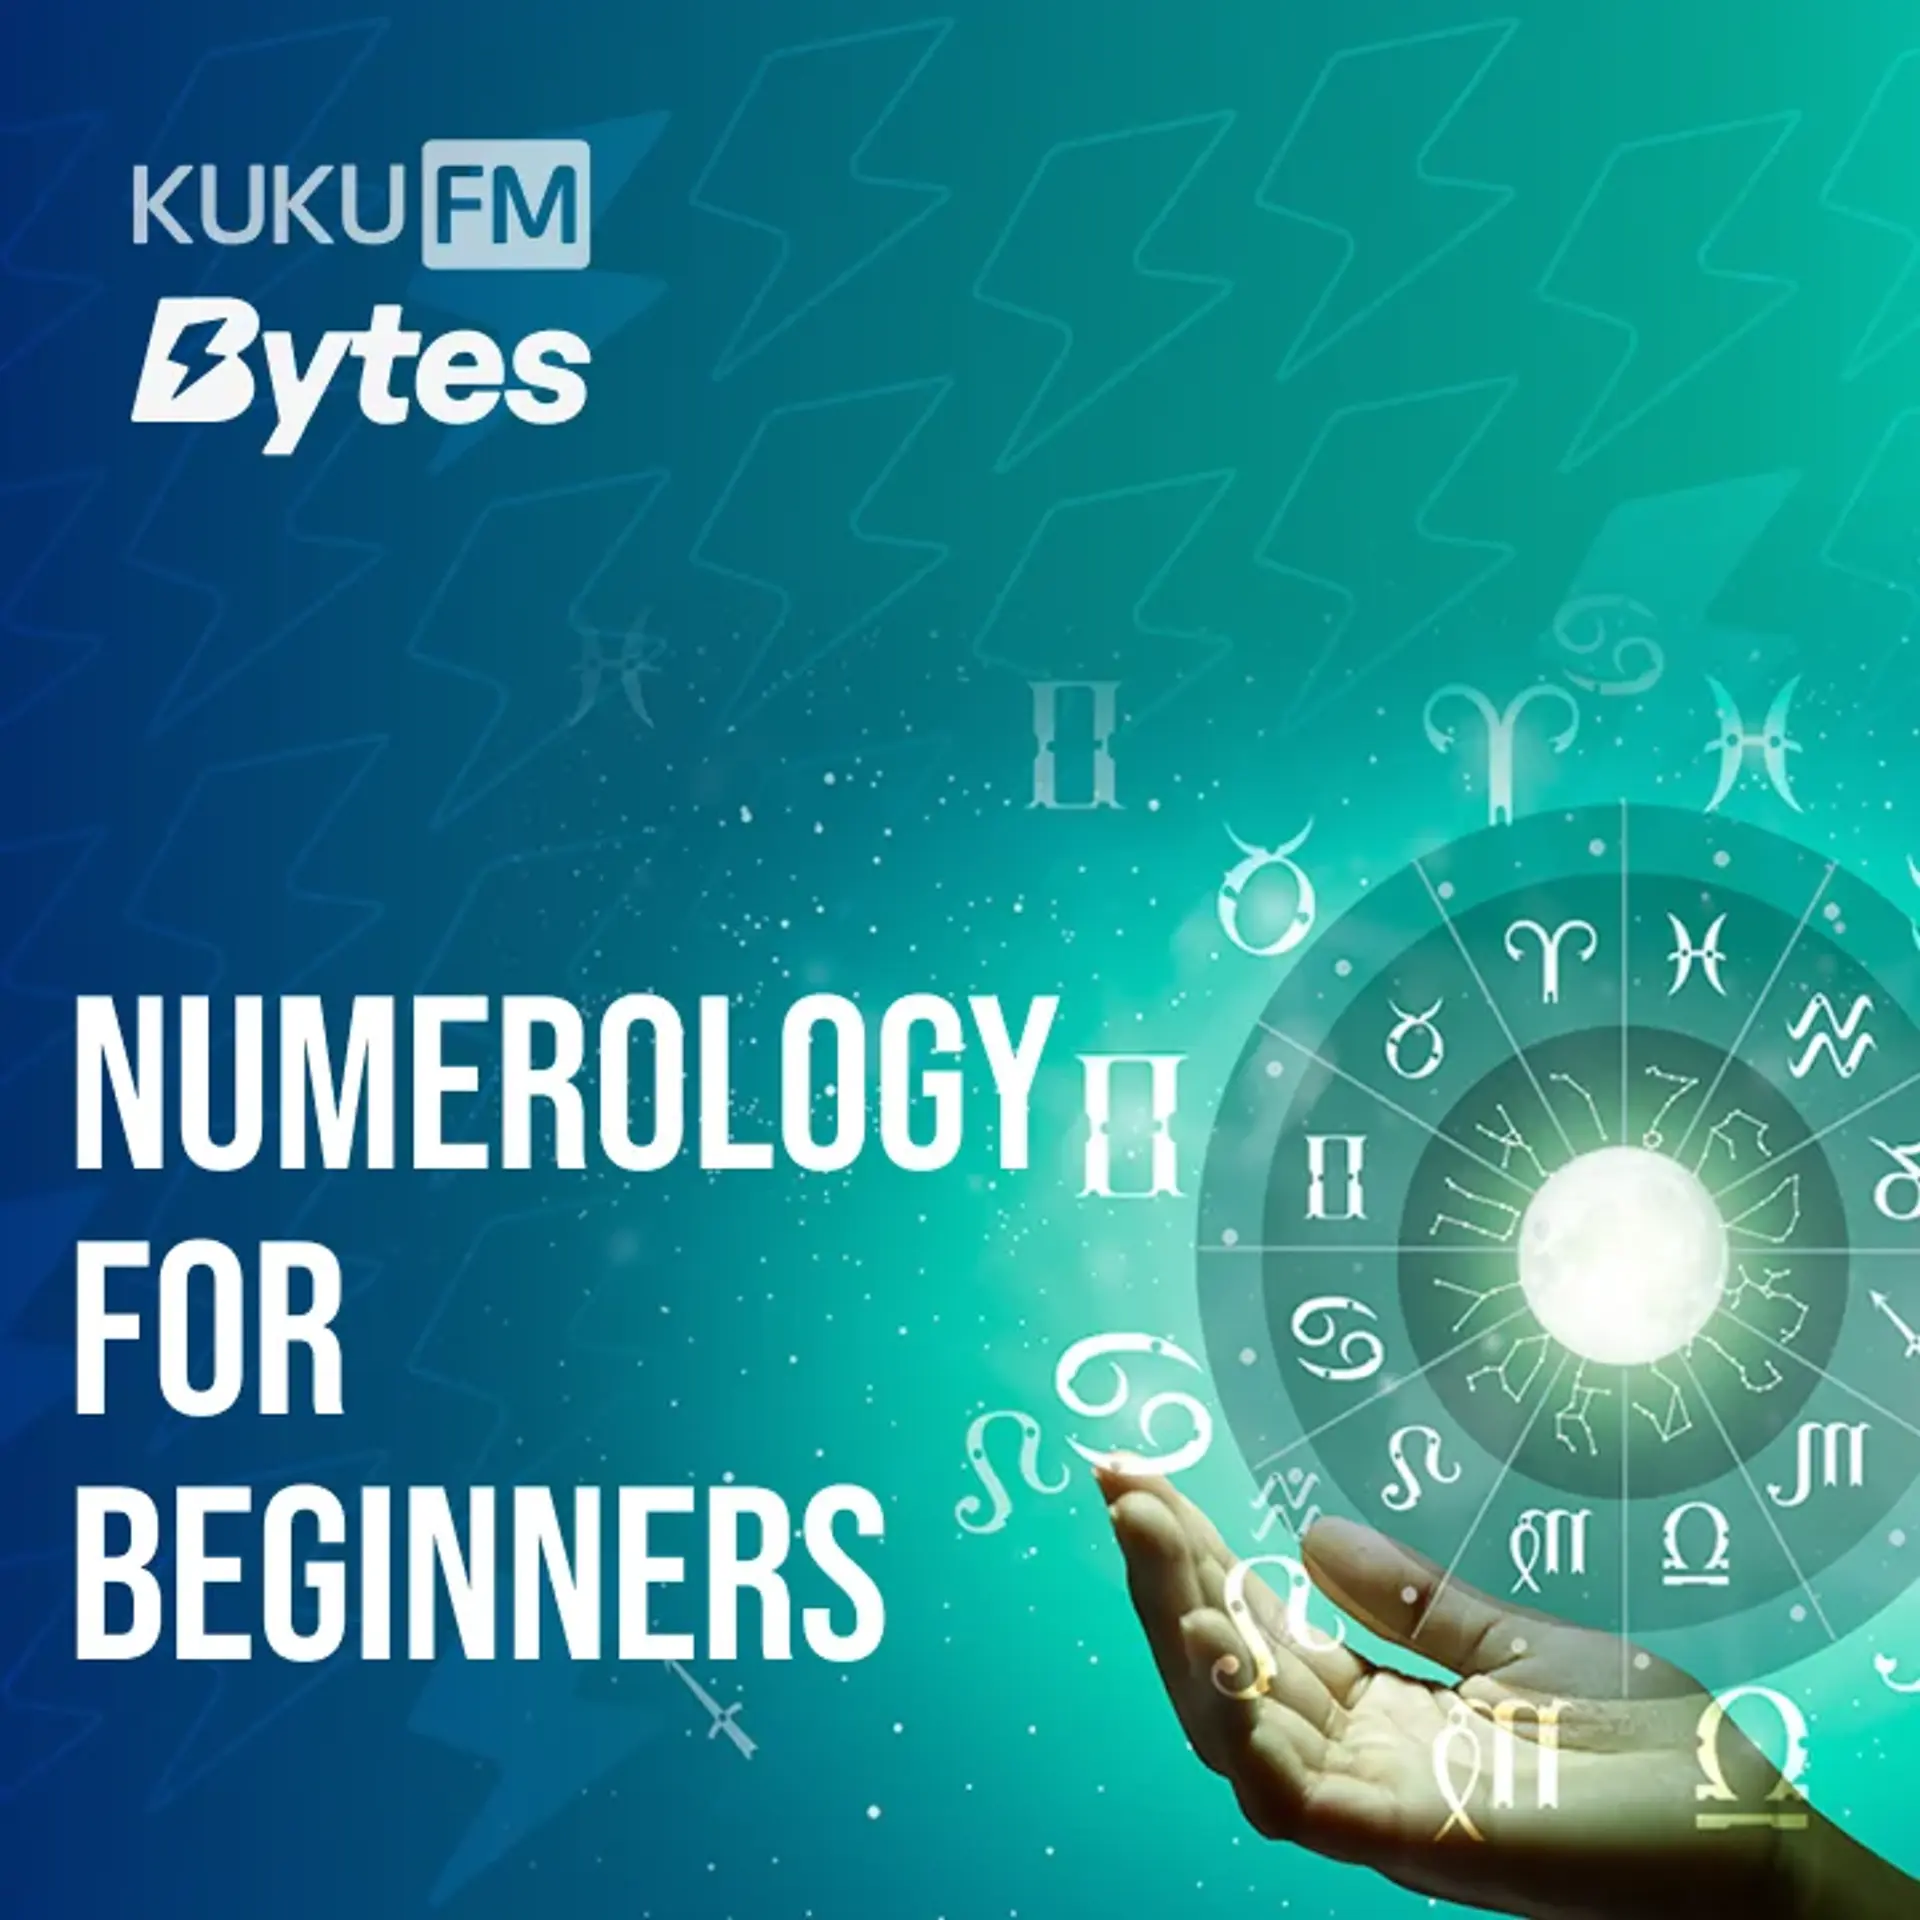 Numerology For Beginners | 